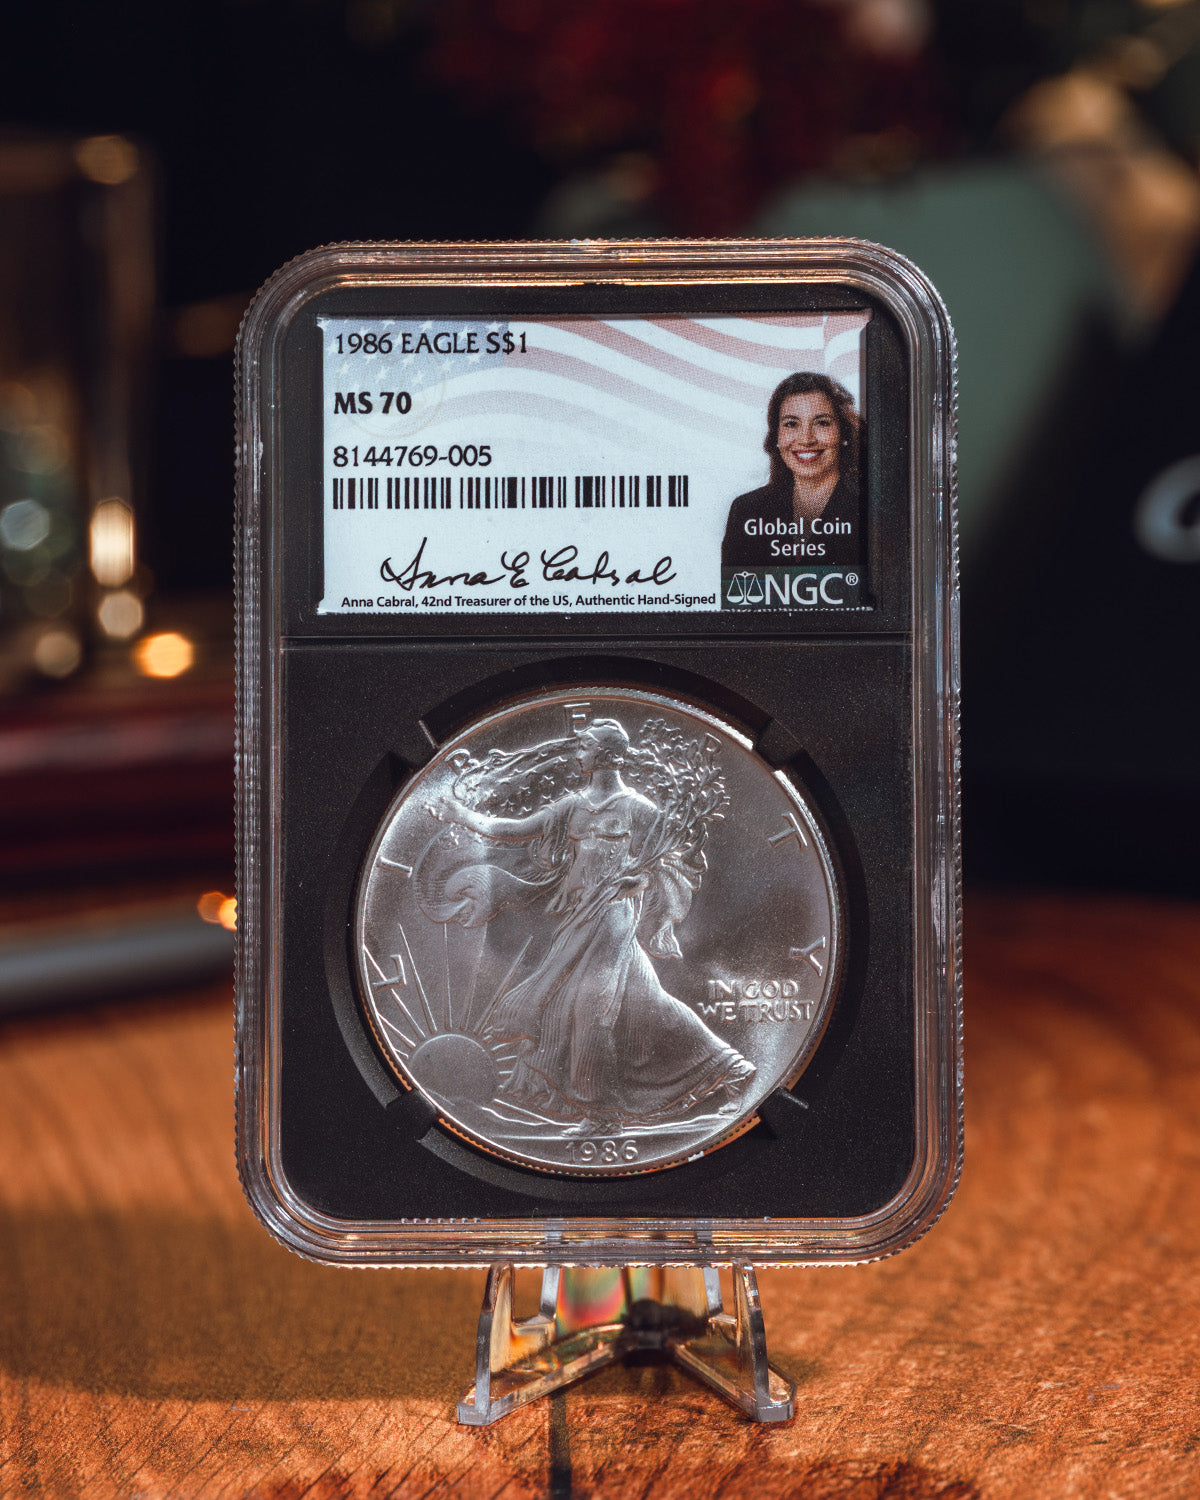 1986 "S" Silver Eagle | NGC MS70 "Global Coin Series" | Anna Cabral Autographed